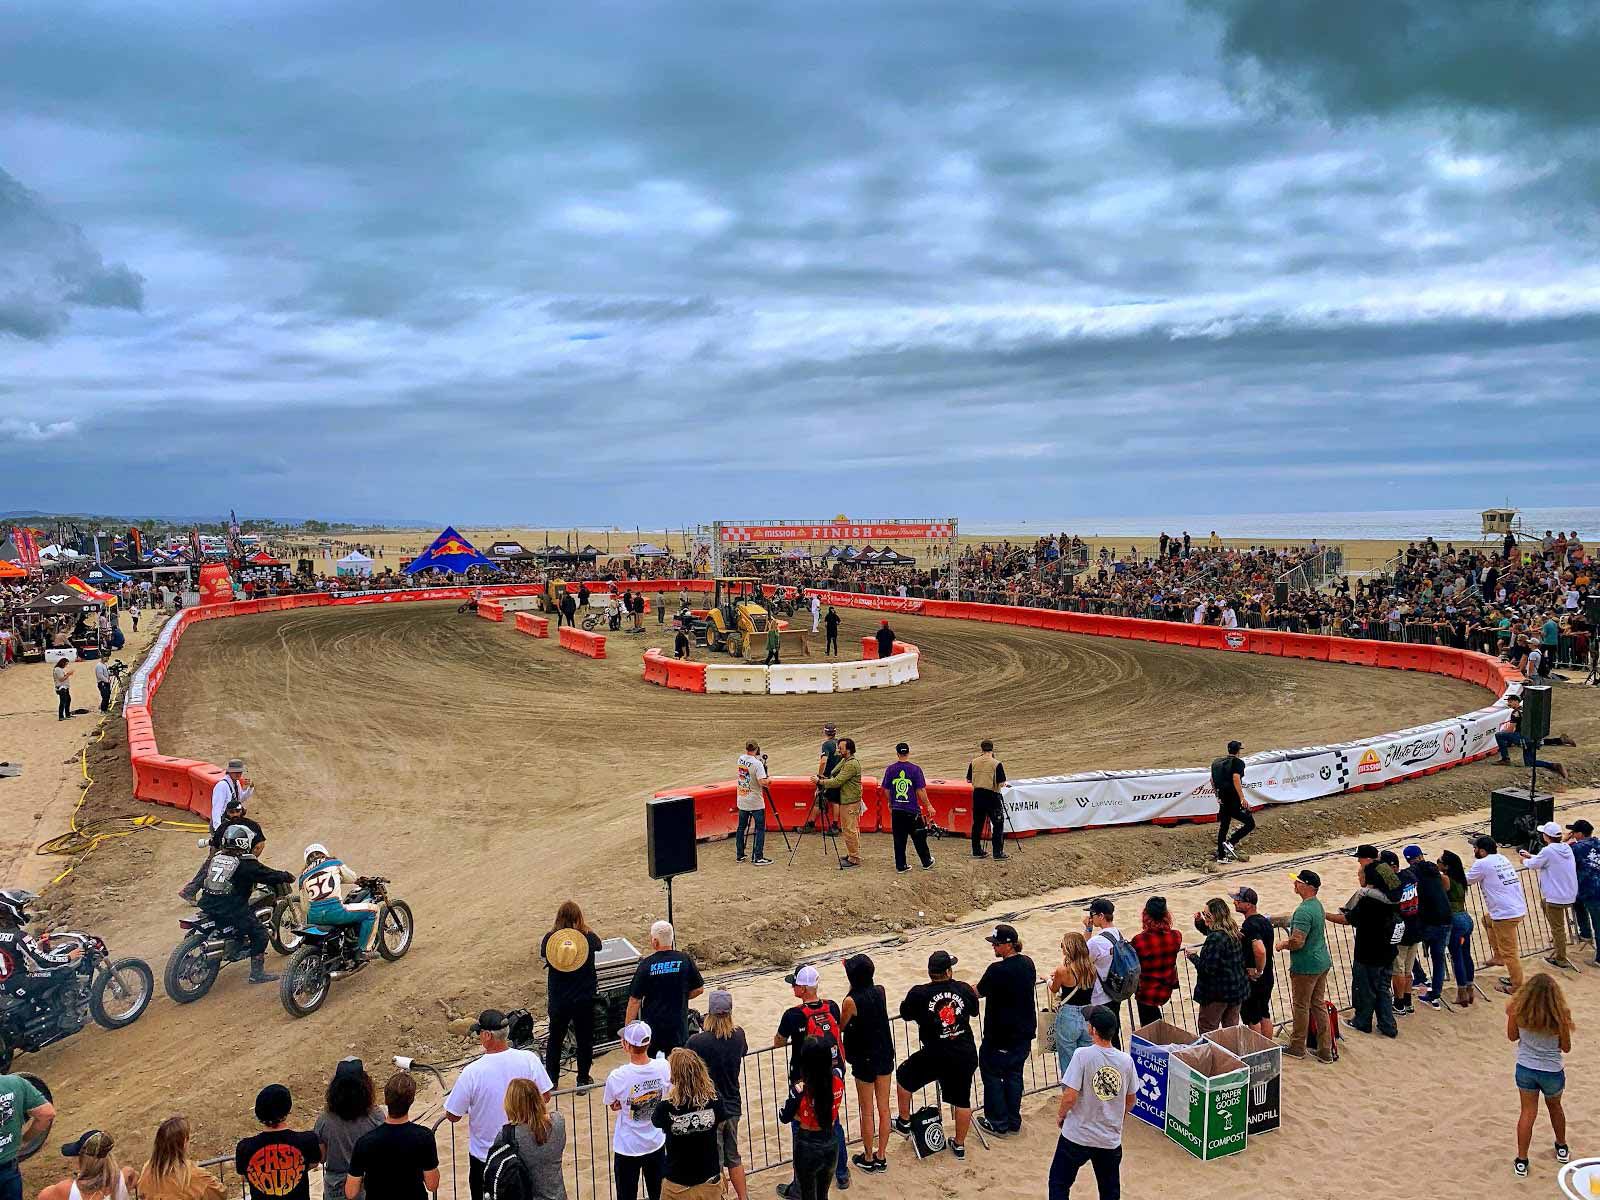 The dirt track was perfect this year, placed right between the ocean and the Straight Rhythm.